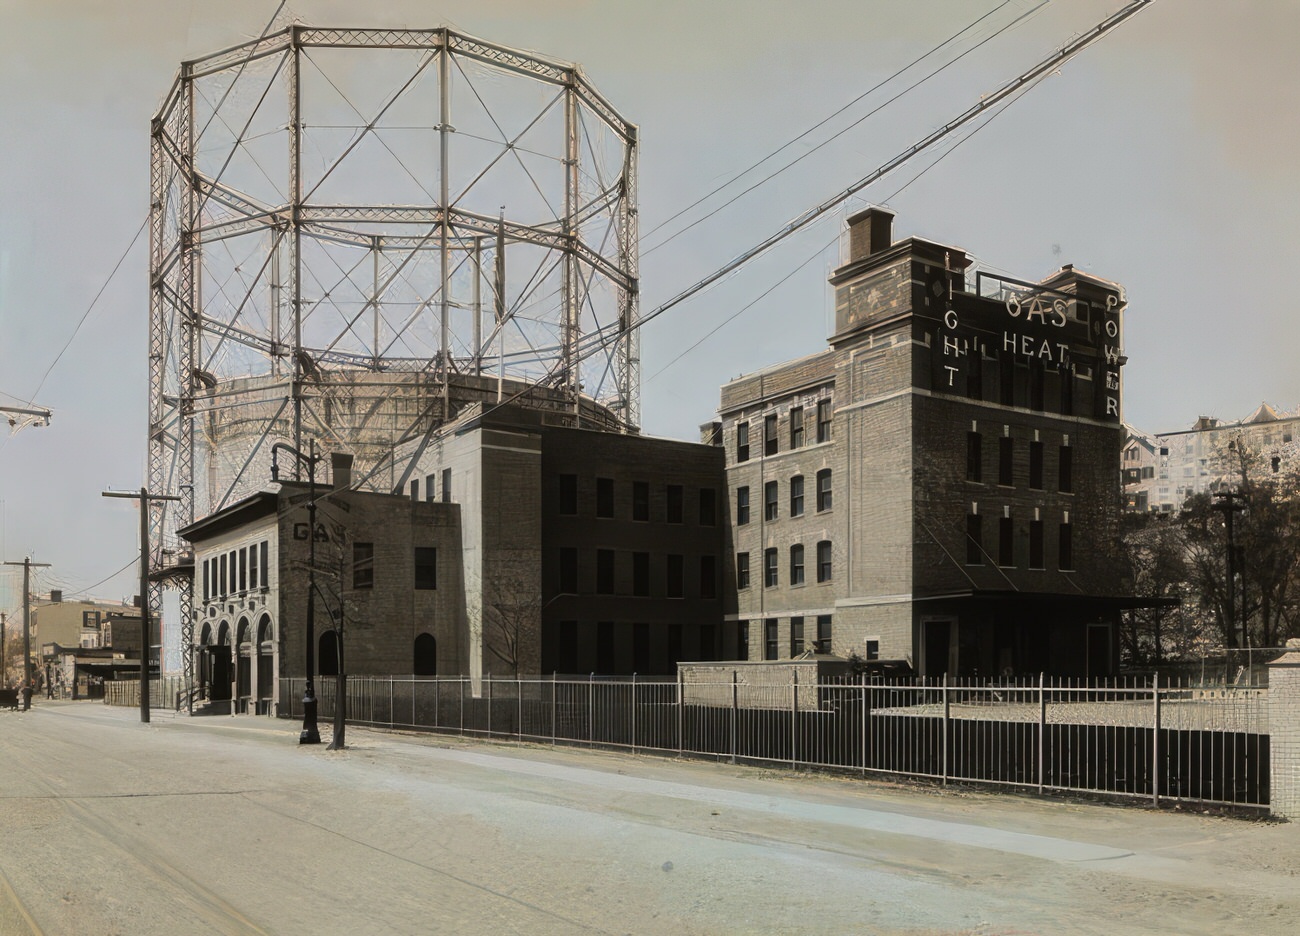 Northern Union Gas Company At 1815 Webster Avenue, Circa 1920.